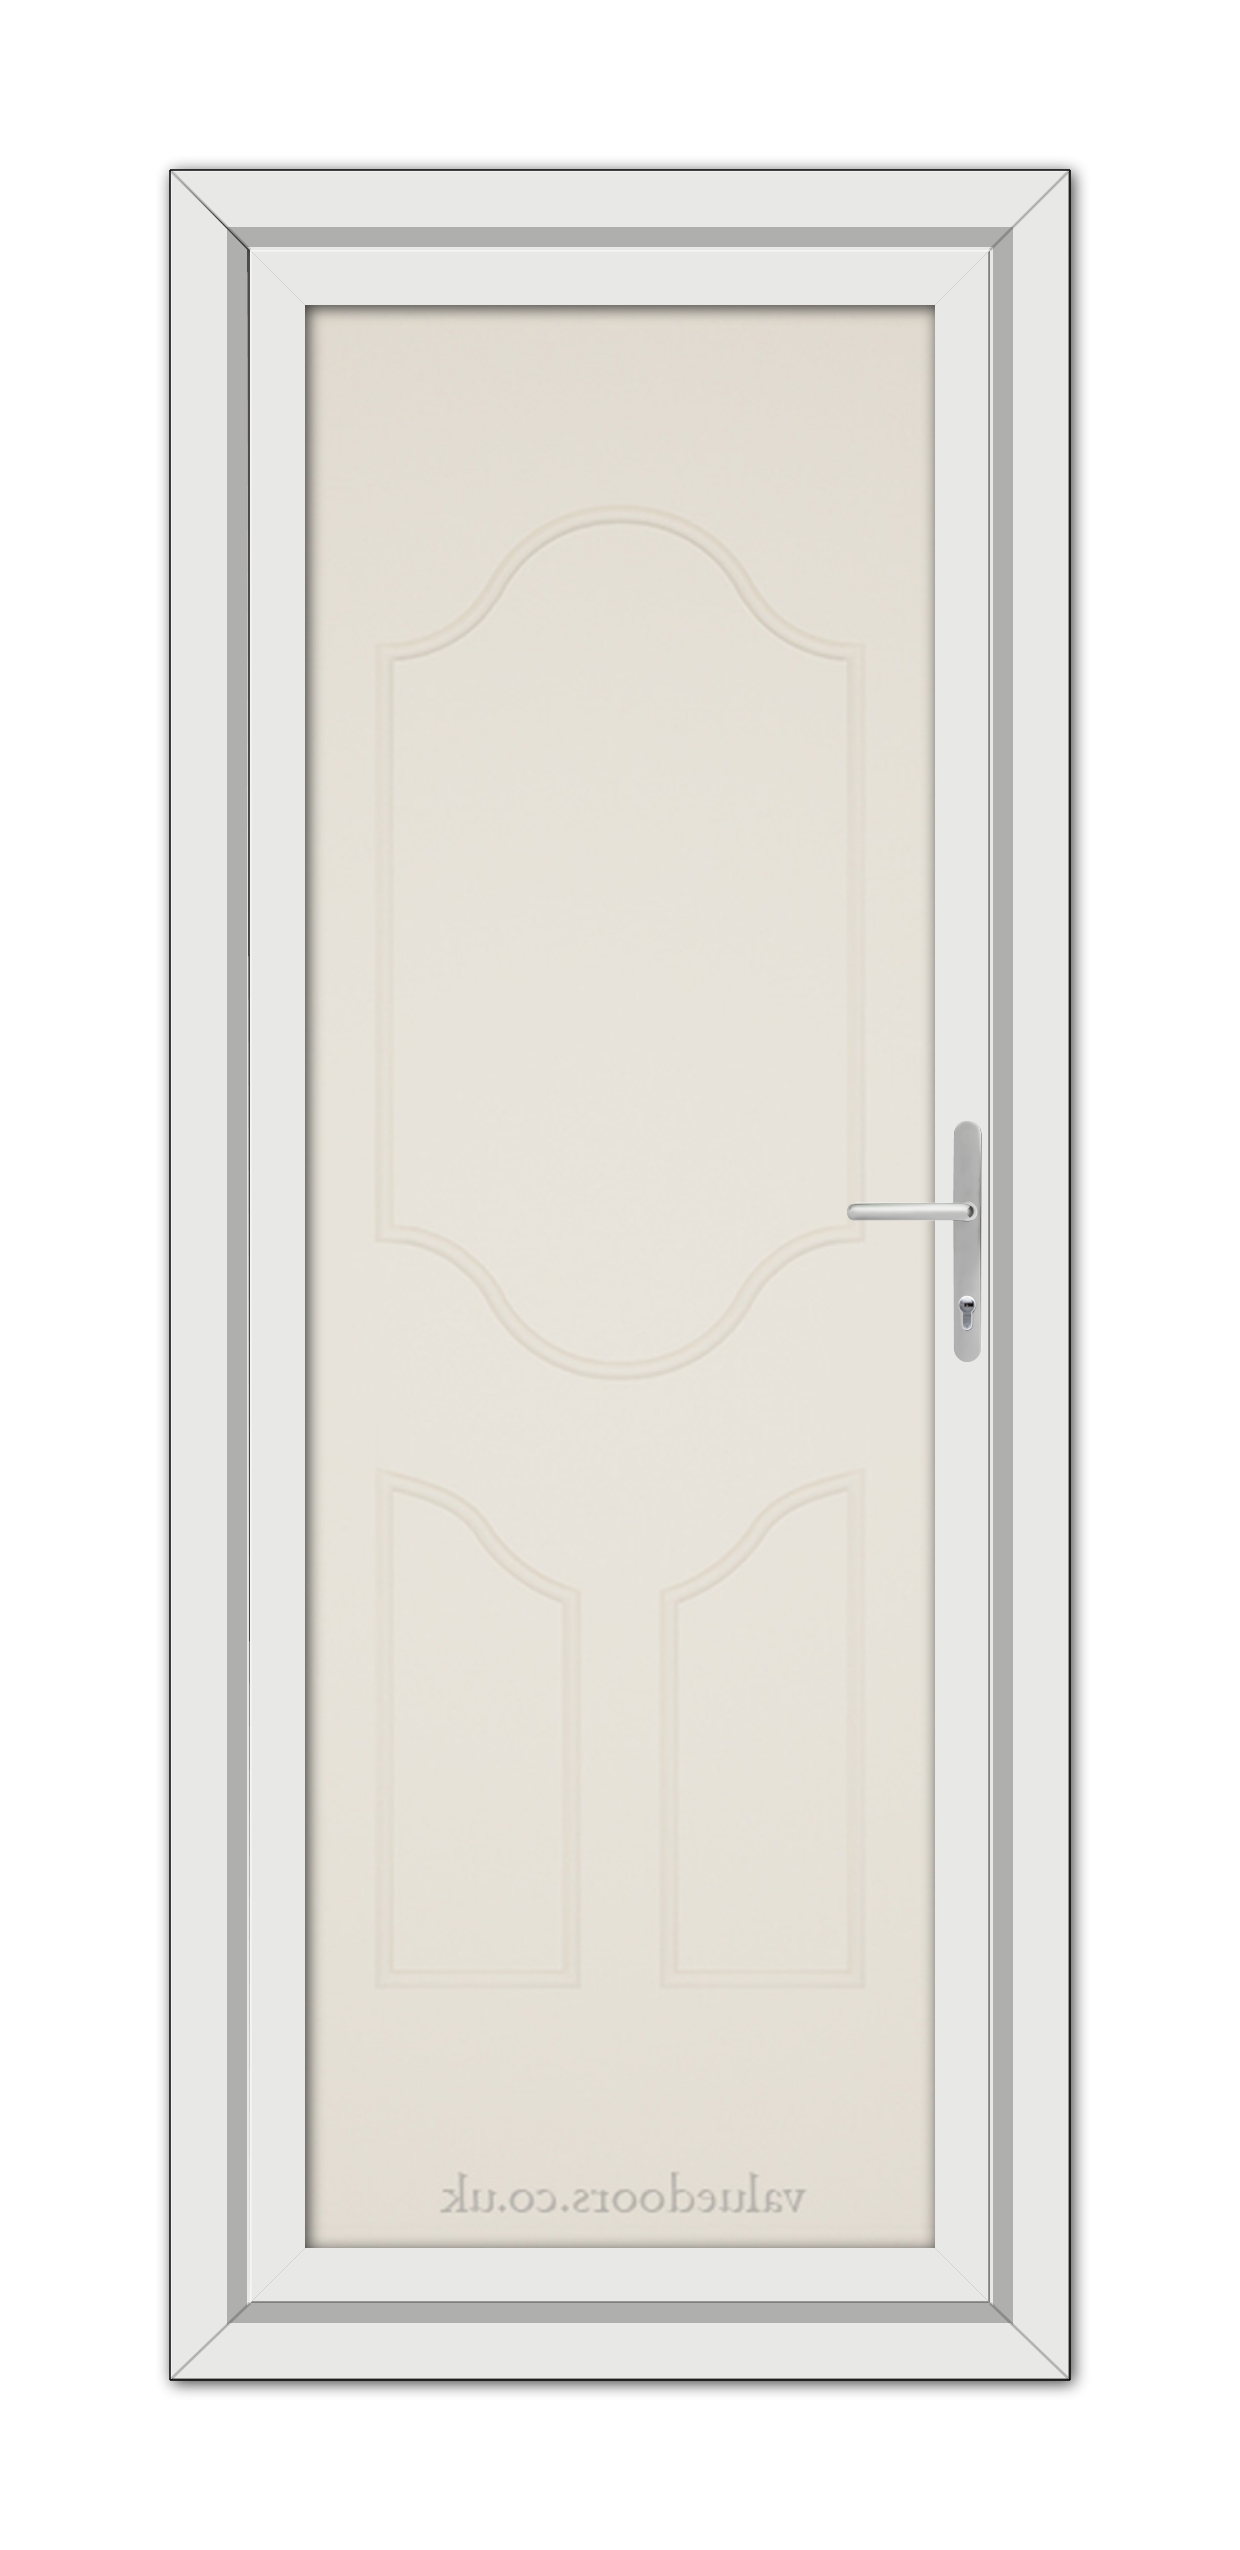 A vertical image of a Cream Althorpe Solid uPVC door with a silver handle, set within a gray frame, against a white background.